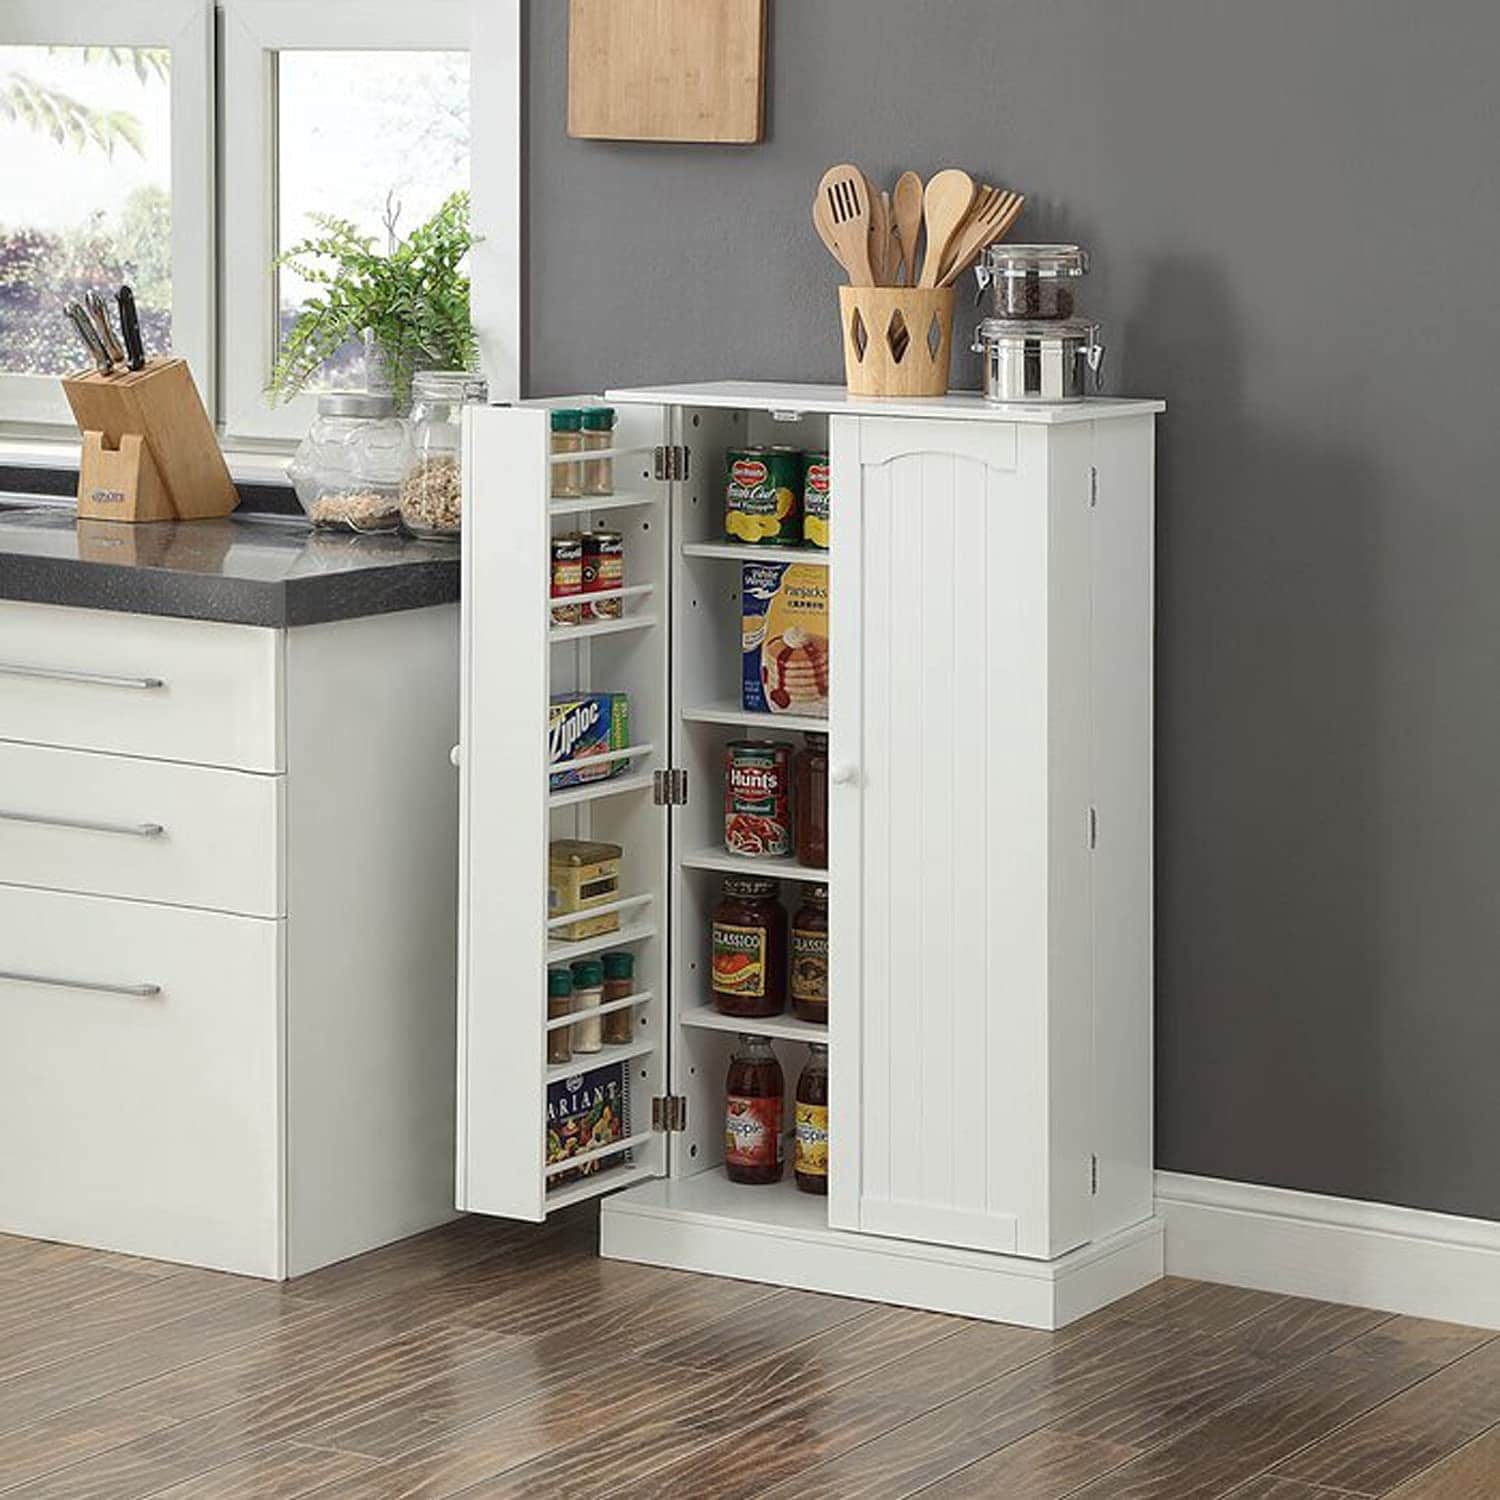 https://ak1.ostkcdn.com/images/products/is/images/direct/d817a9579c1193112a4cd10e501811338c3a88ae/41%22-Kitchen-Pantry%2C-Farmhouse-Pantry-Cabinet%2C-Storage-Cabinet-with-Doors-and-Adjustable-Shelves-41%22-H-x-23.2%22-W-x-12%22-D-%28White%29.jpg